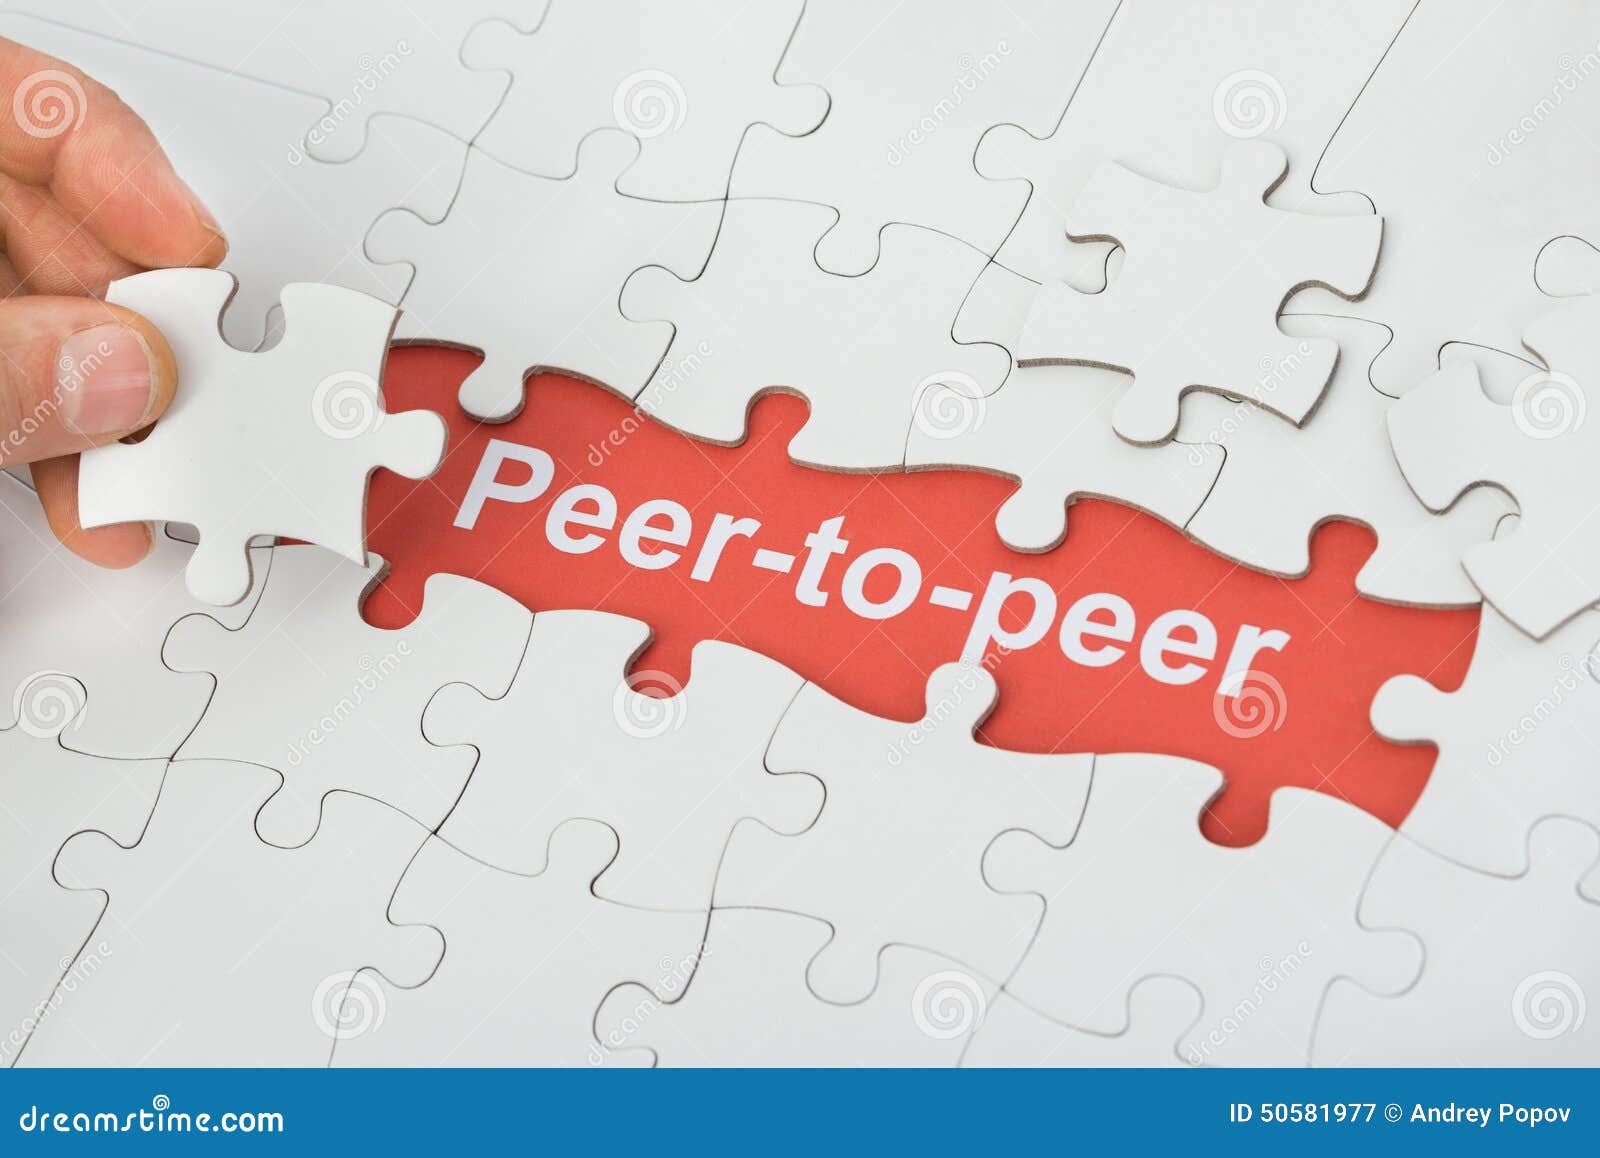 peer-to-peer text under white jig saw puzzle